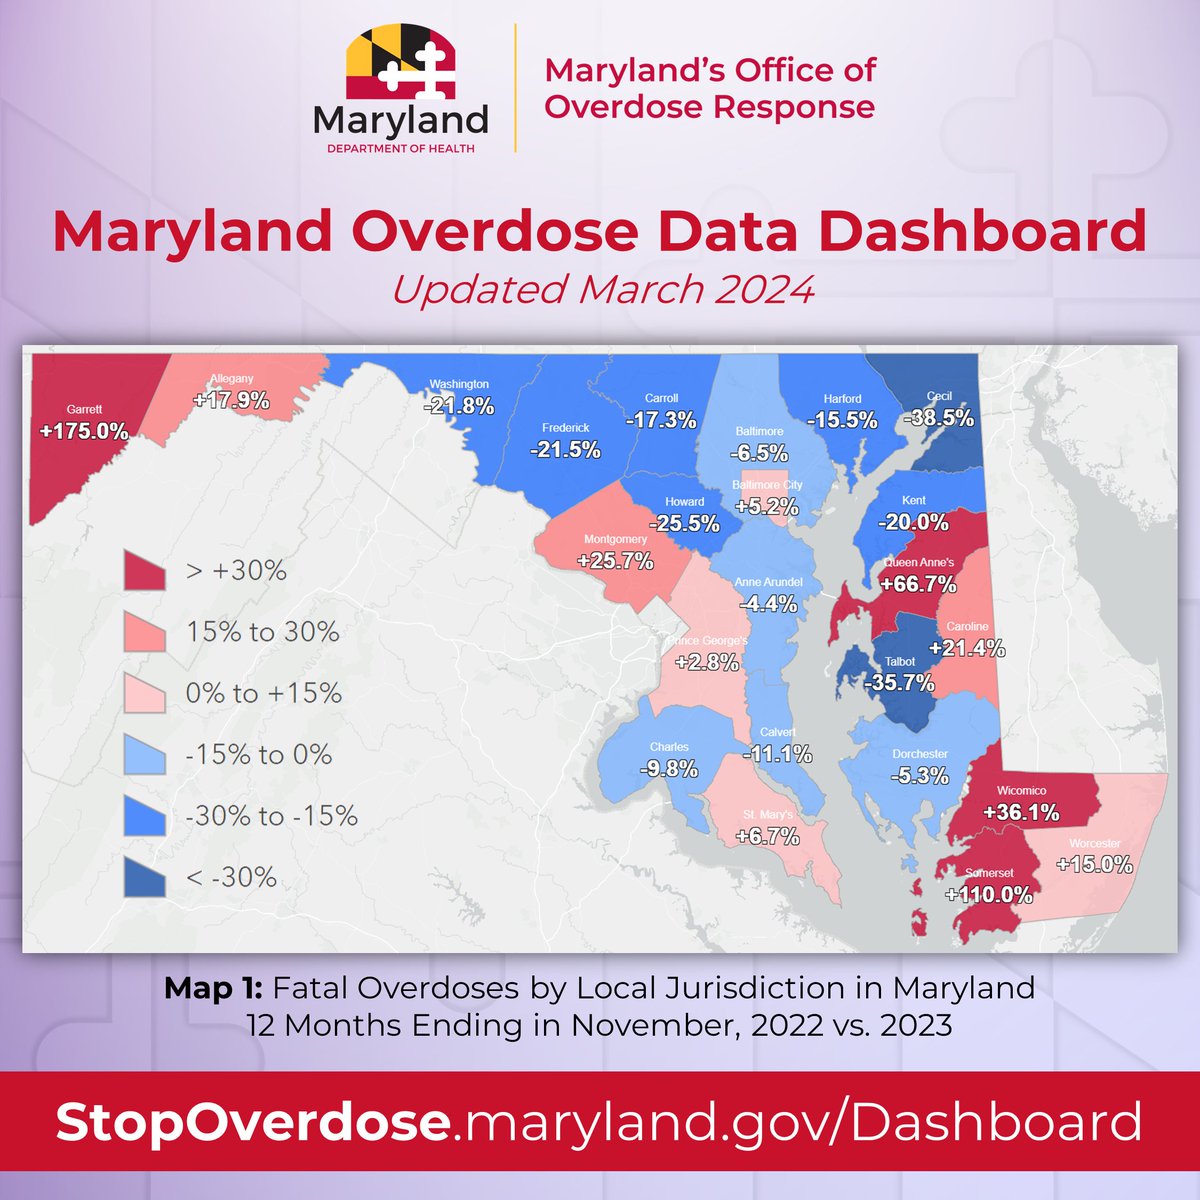 We completed the March update to Maryland's Overdose Data Dashboards today. They now show preliminary data provided by @MDHealthDept's Vital Statistics Administration through Nov. '23. There were 2,553 fatal ODs in MD from Dec. '22 to Nov. '23, an annual decrease of .7%. 🧵